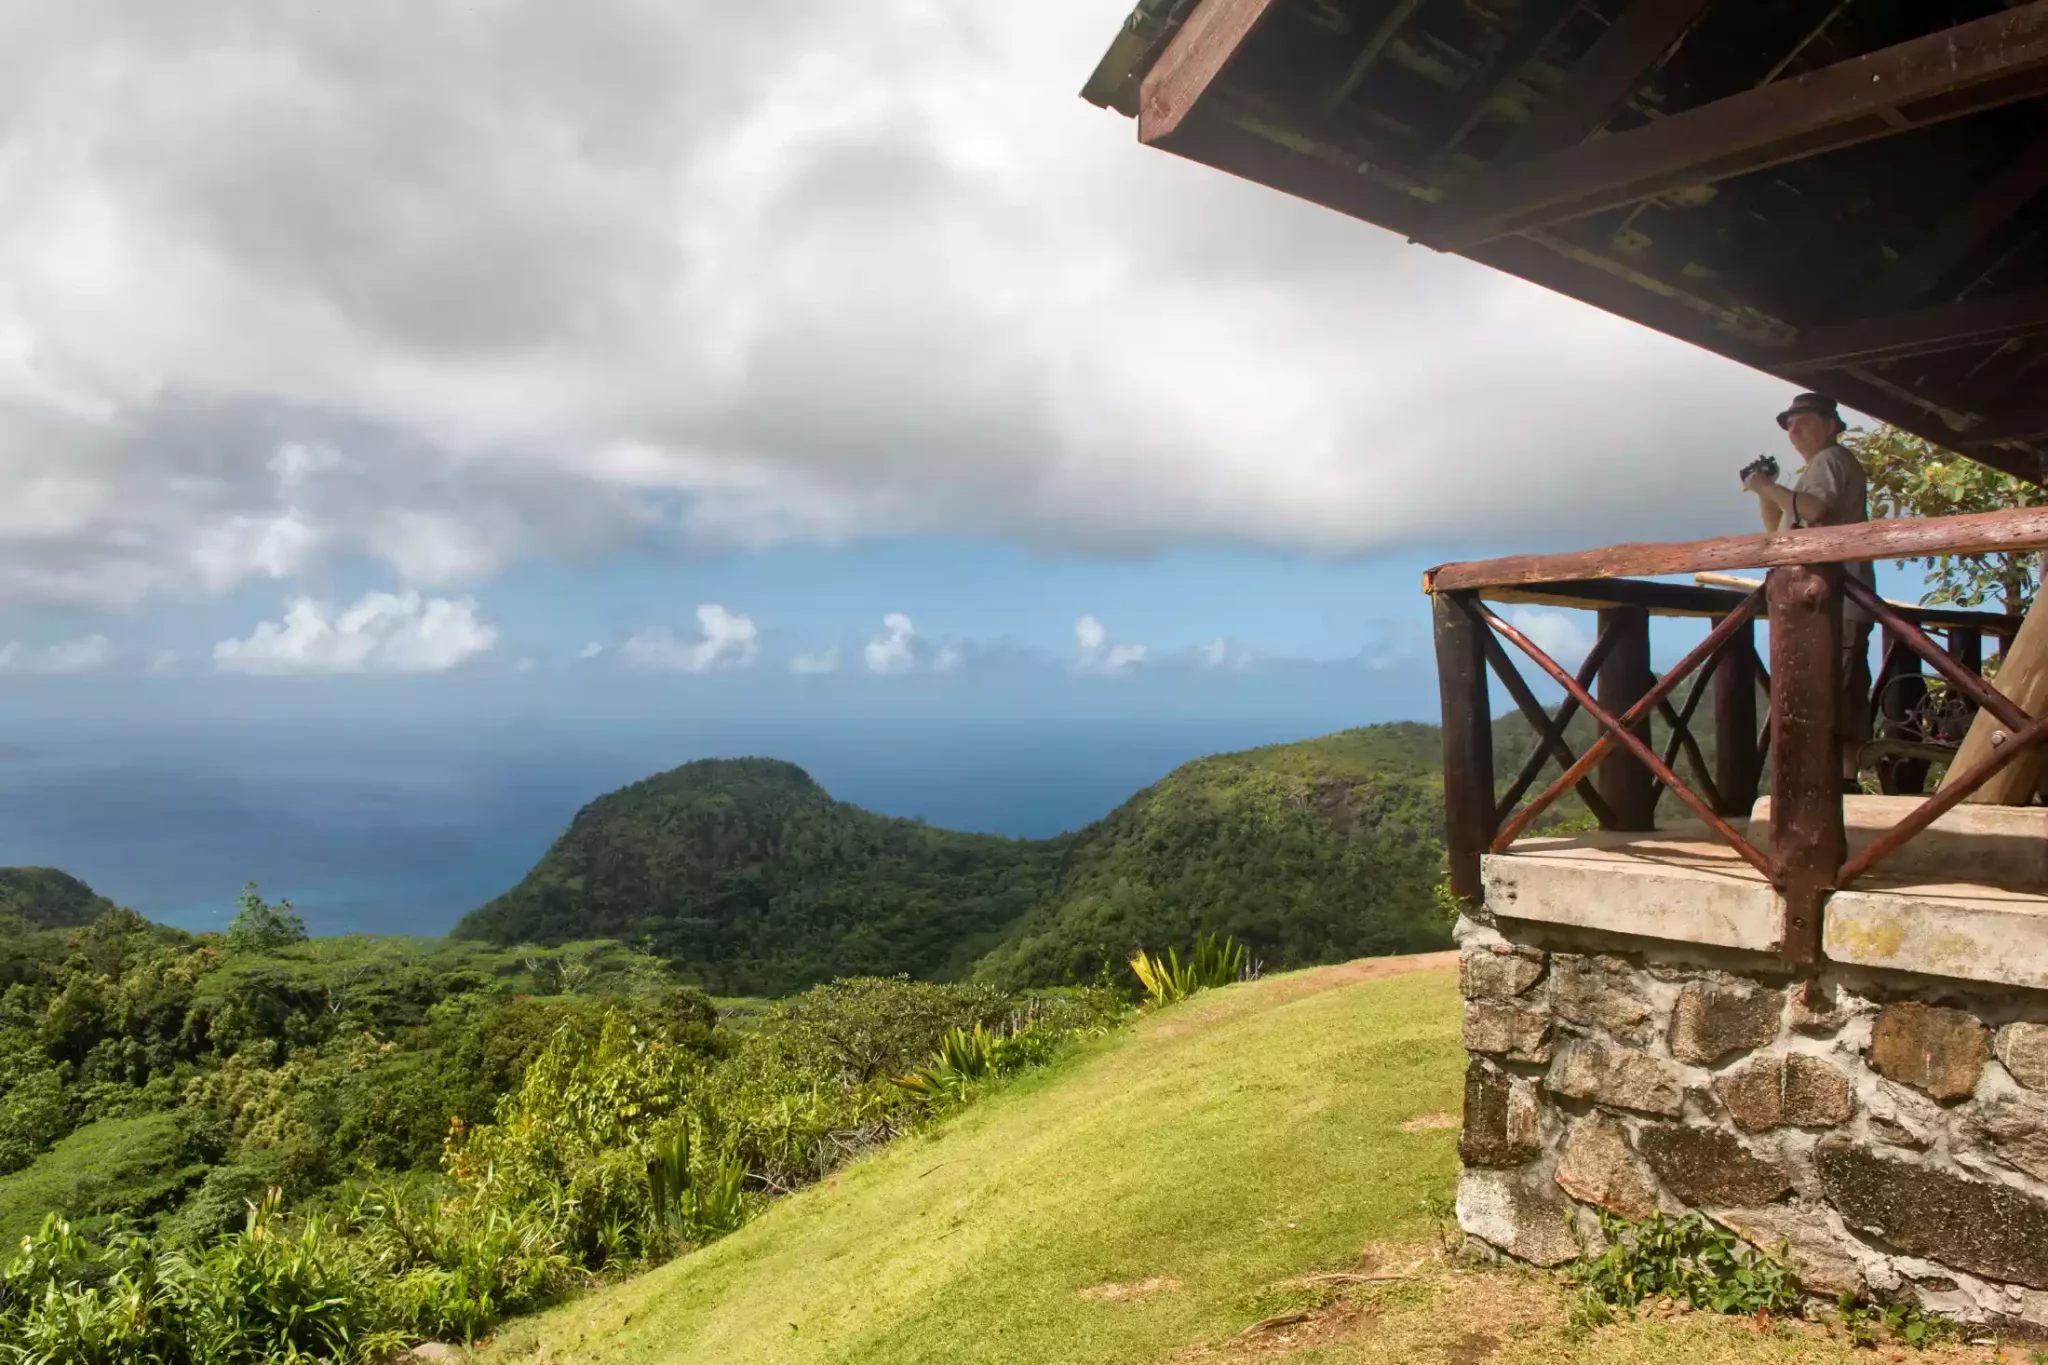 View from Mission Lodge Lookout in Mahe Seychelles.